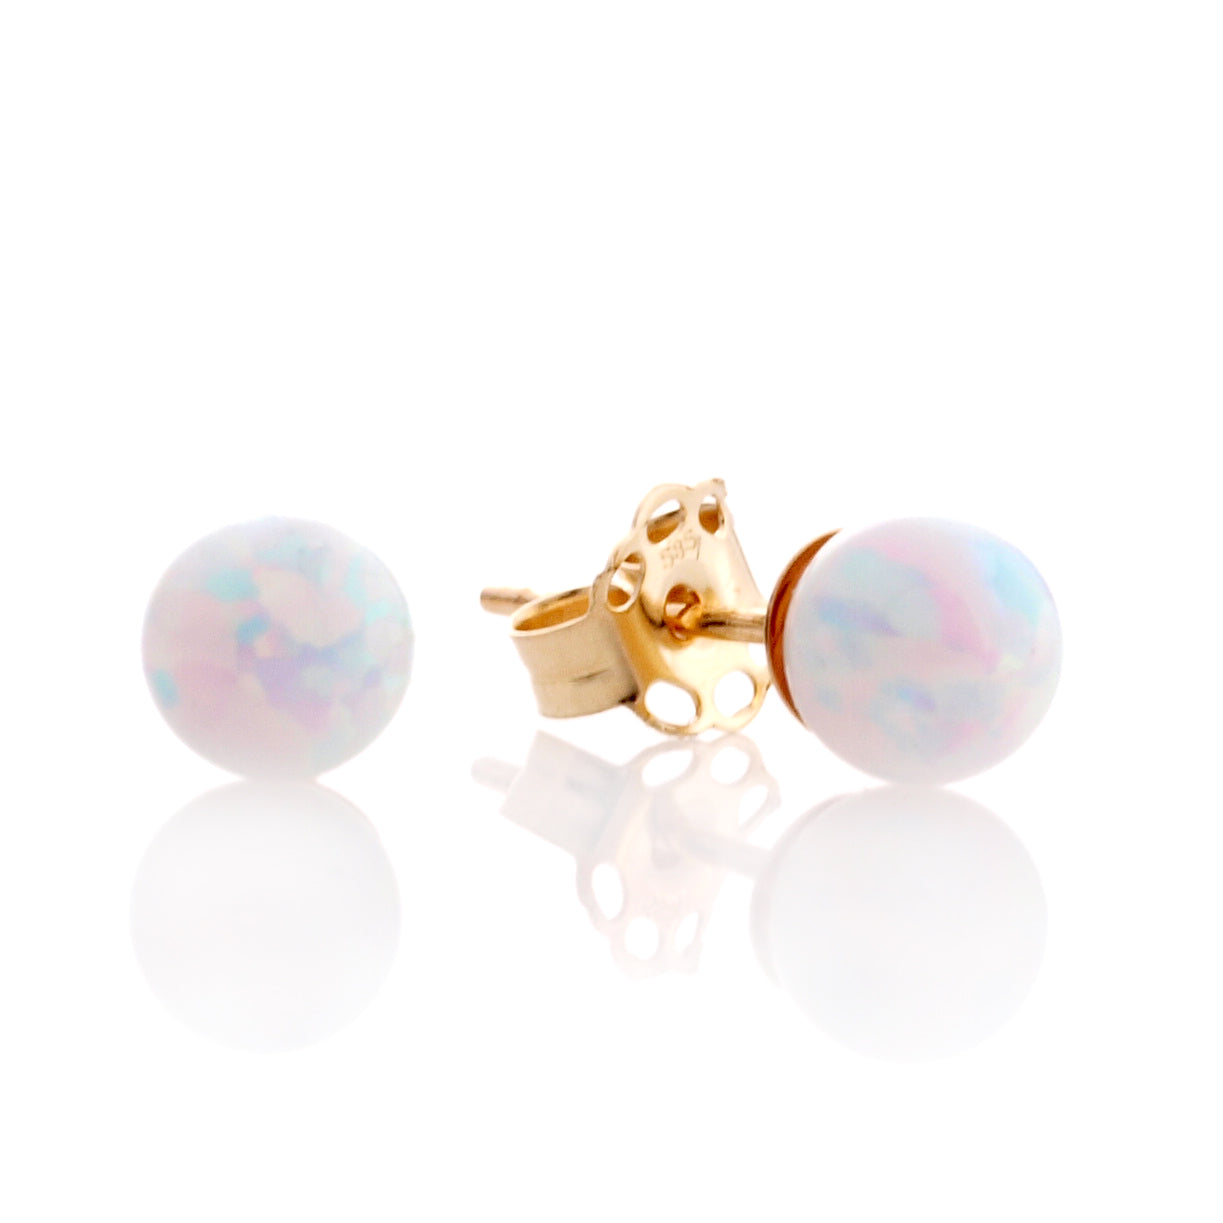 14K Gold Earrings with White Opal